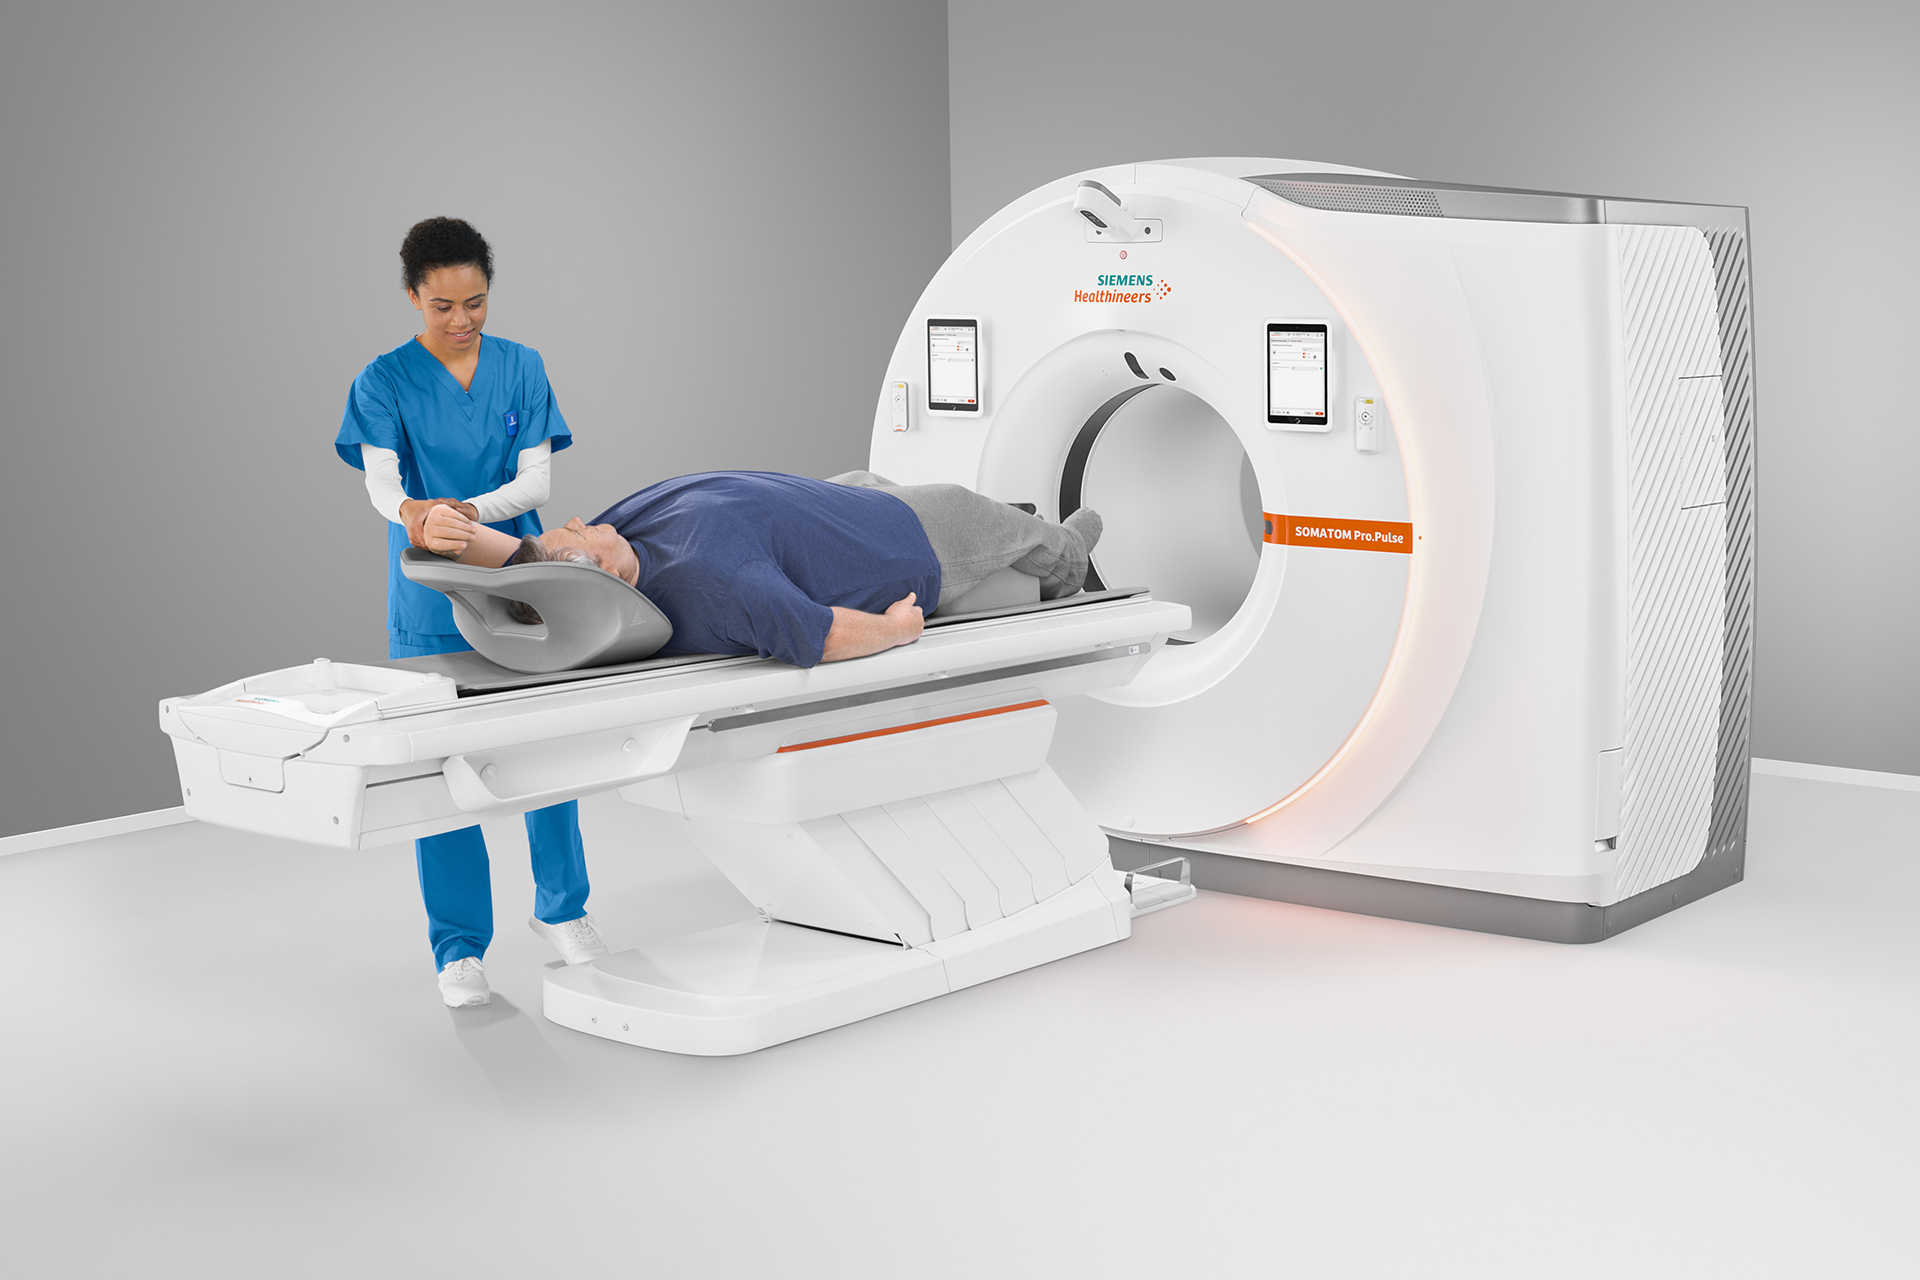 Healthcare professional operating an MRI machine with a patient lying down for a scan